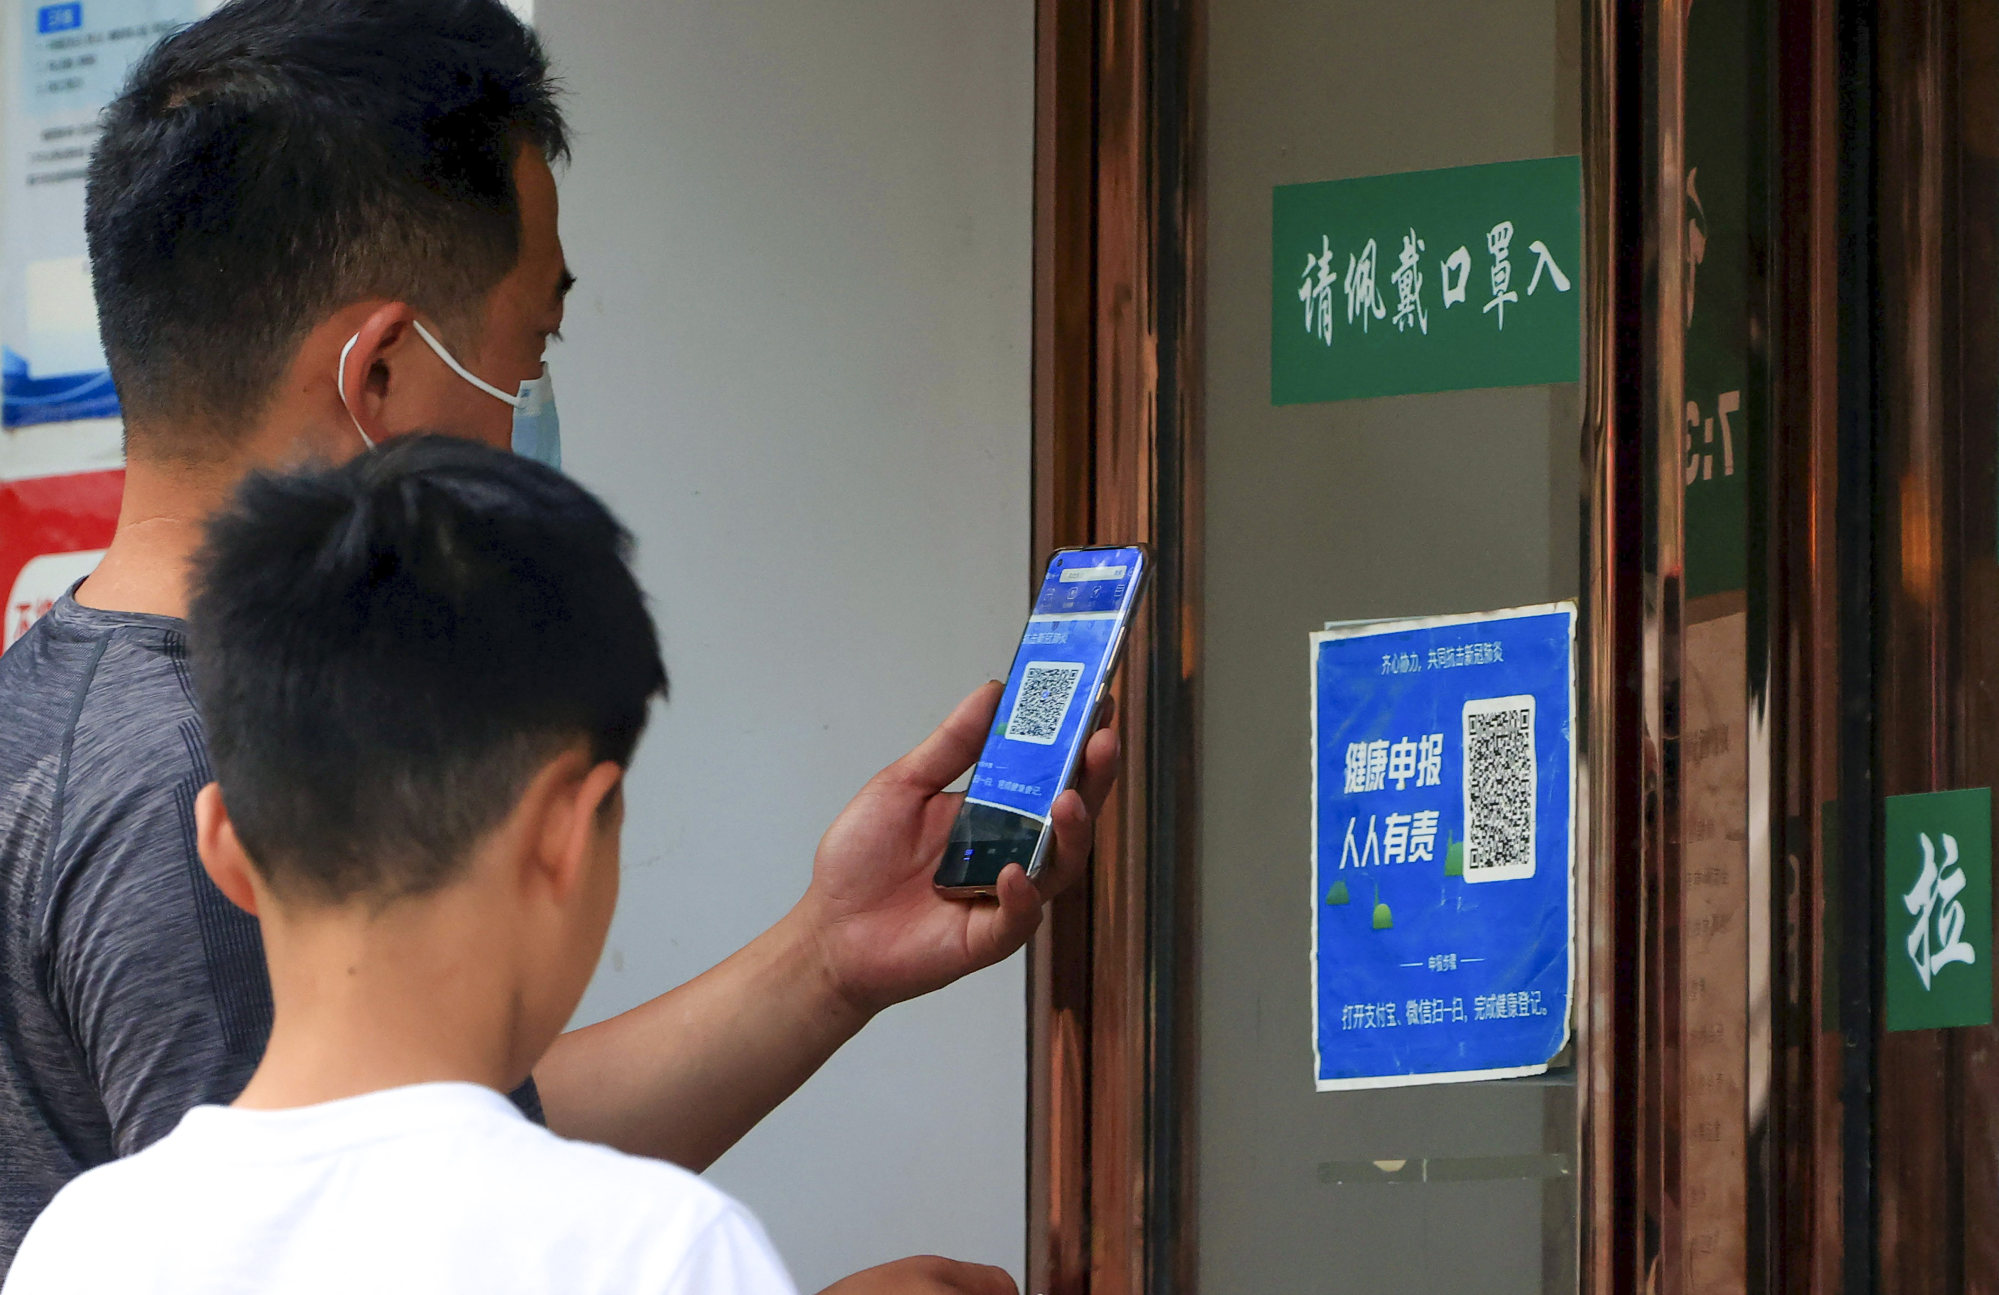 The health code has become a vital part of everyday life in China. Photo: AP